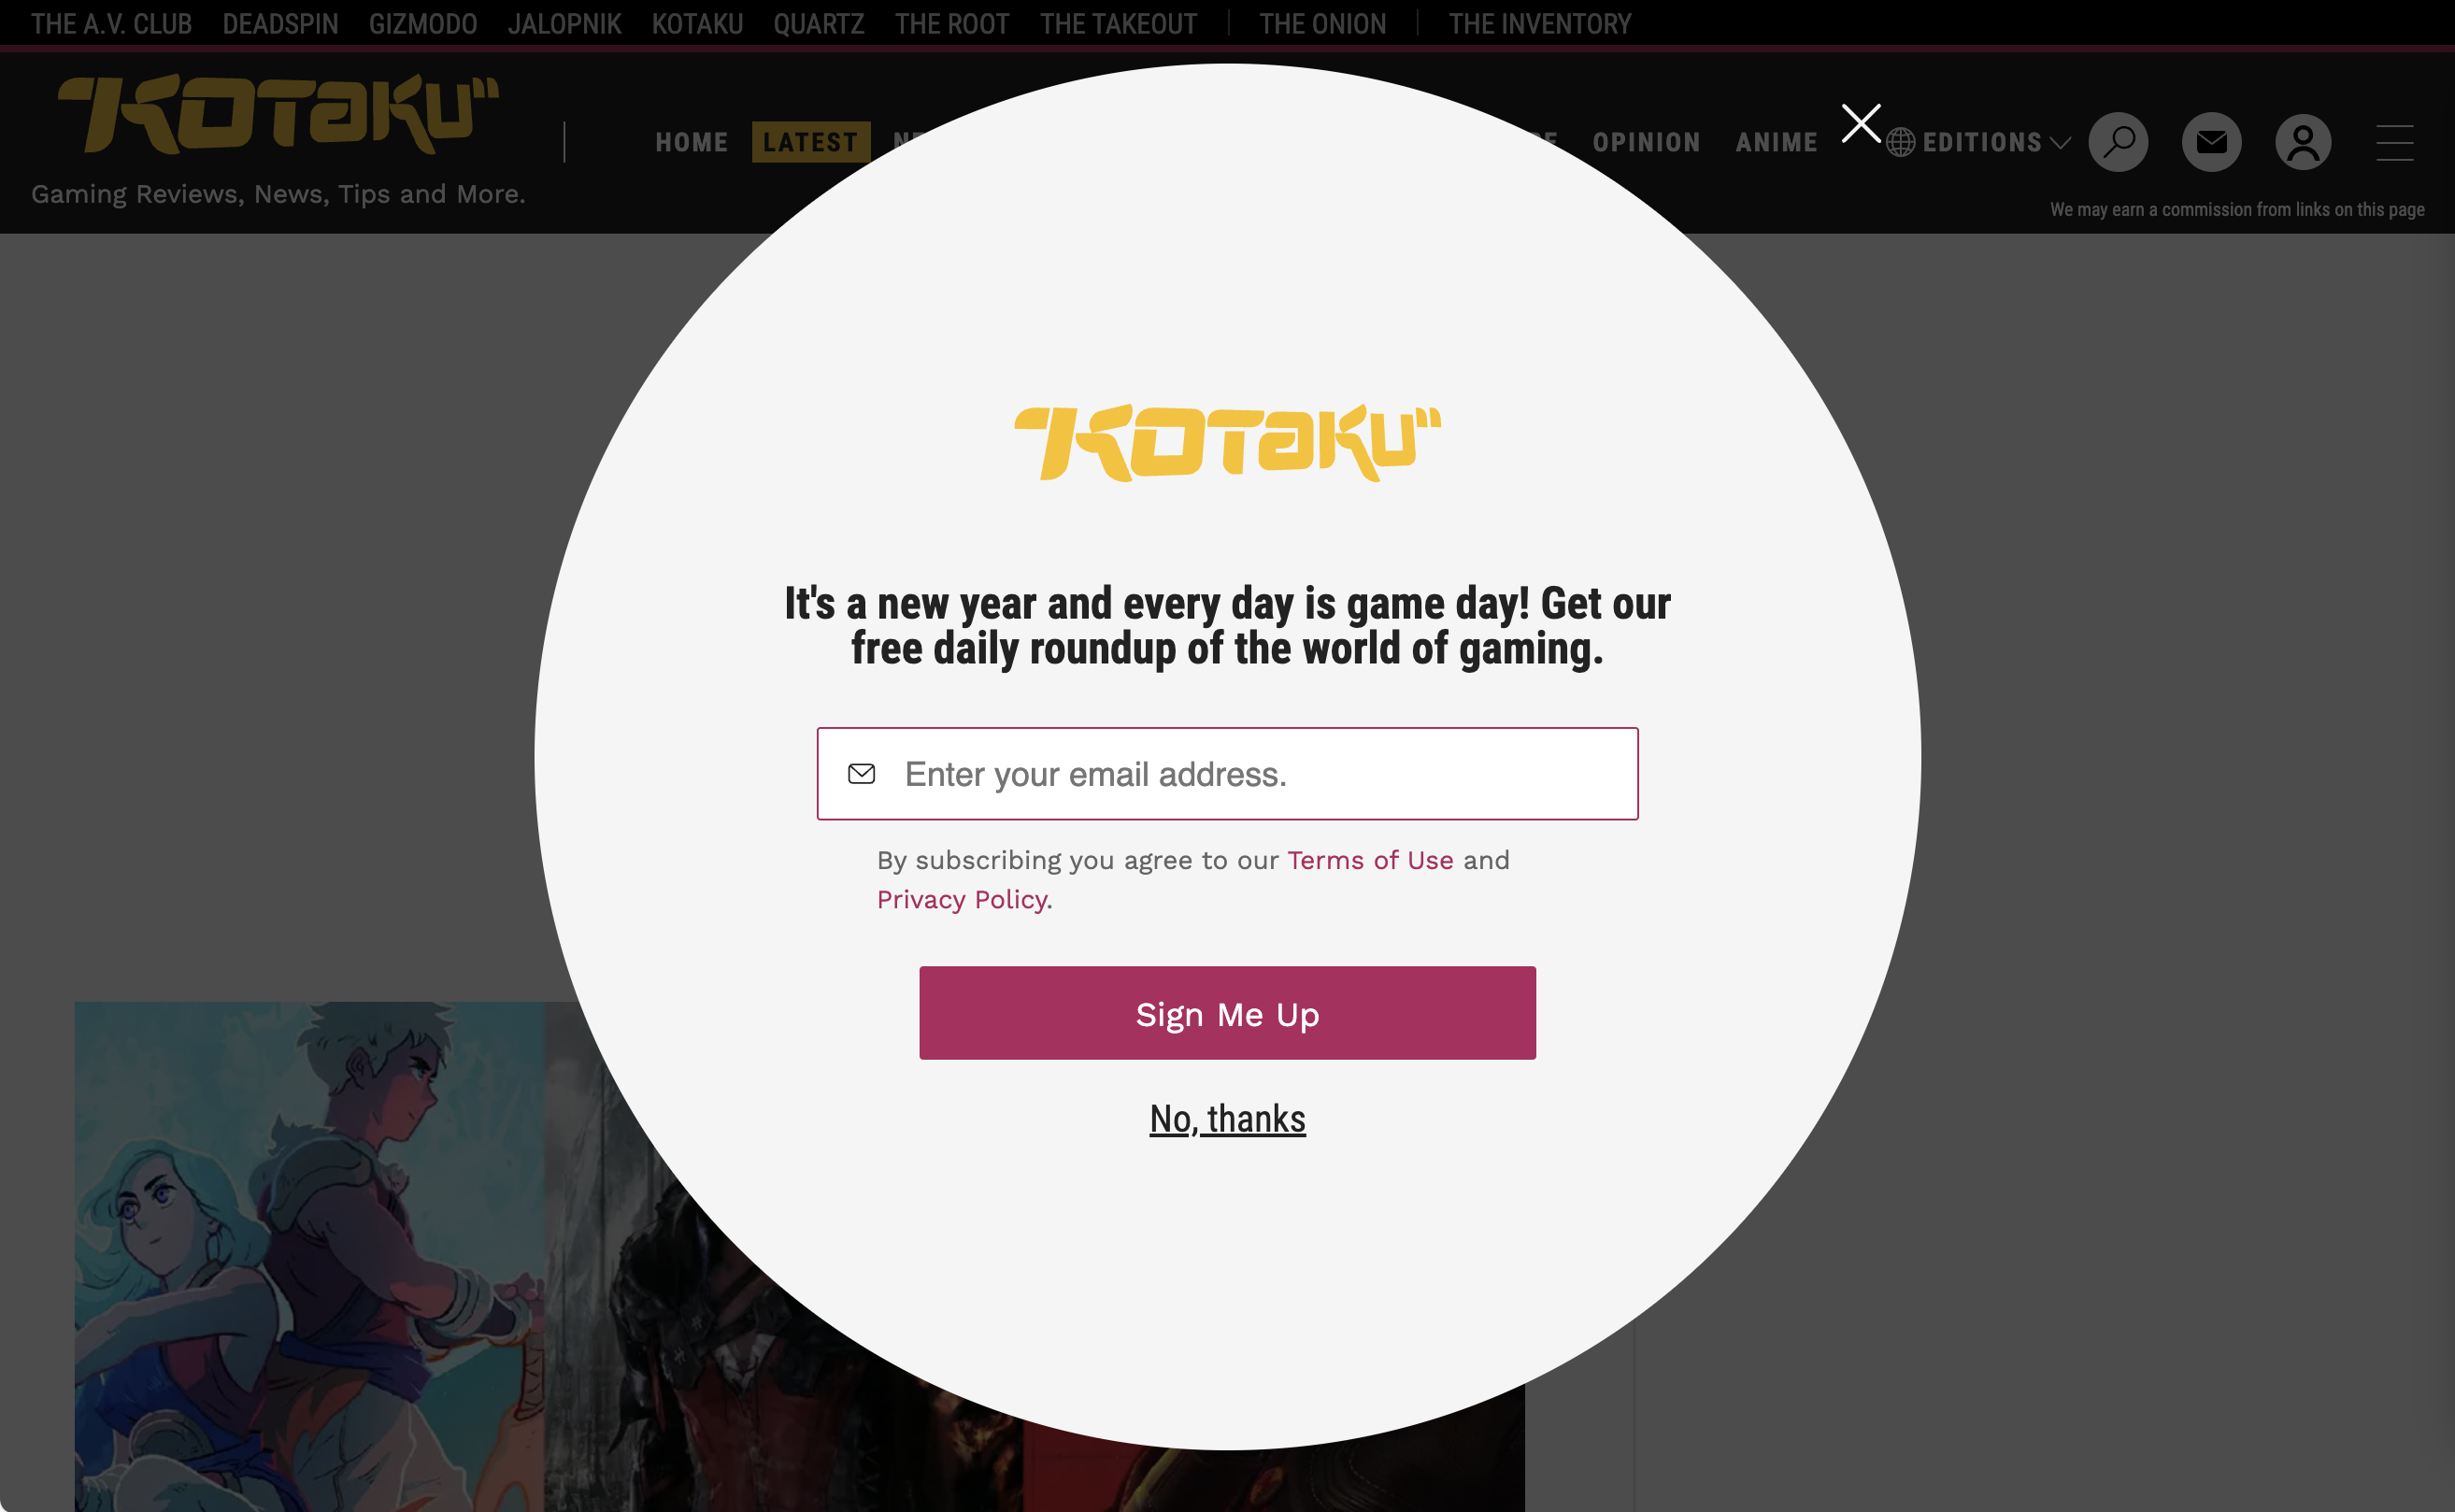 The Kotaku homepage. A large circular modal takes over the entire homepage, obscuring it. There is a newsletter signup prompt contained in the modal, and a faint close button located outside the modal's boundary.